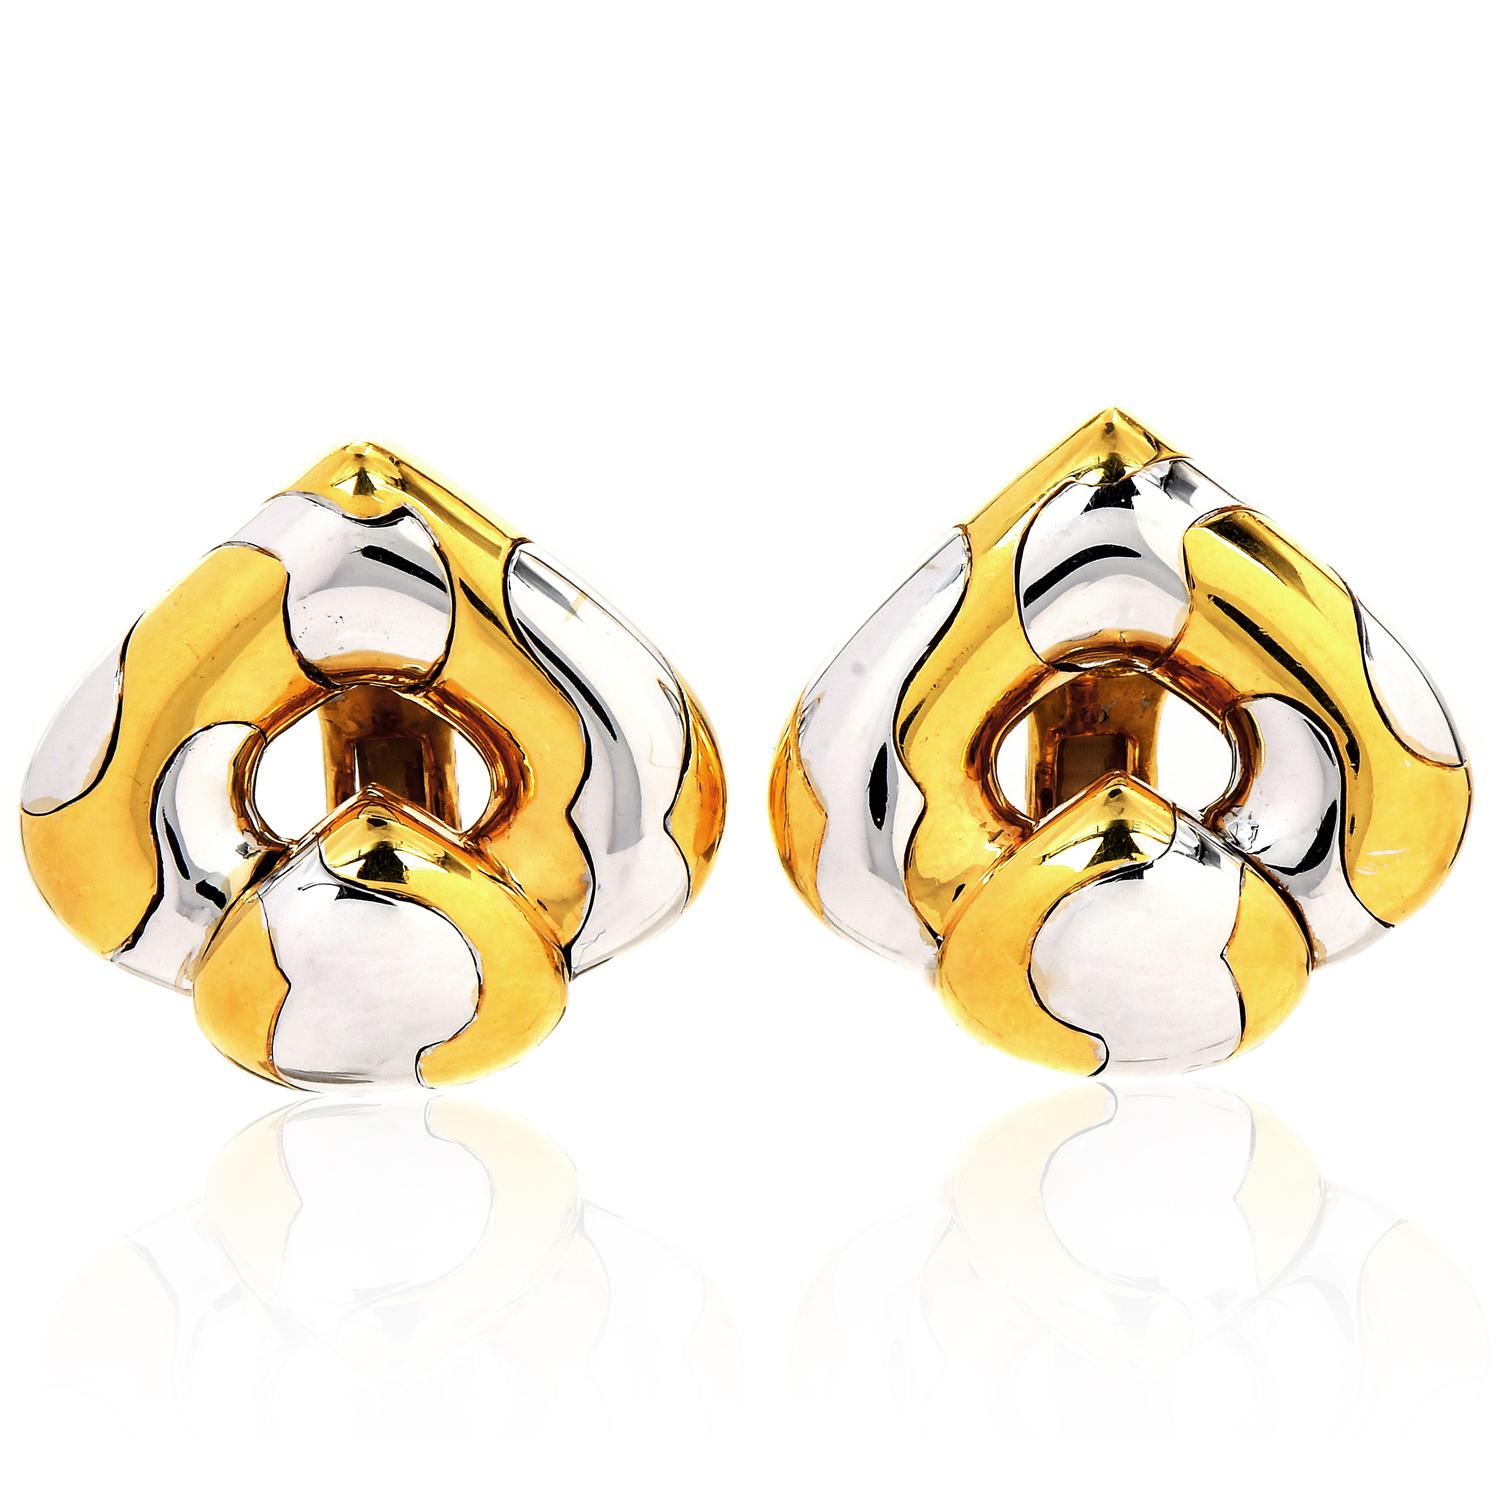 Vintage Collectable Marina B Two Tone Gold Highly Polished Clip On Earrings.

From Pardy collection. These Stylish earrings are crafted in 18K Yellow Gold and Steel. From The Famous Designer Marina Bvlgari.

Secured by Omega Clip Ons for